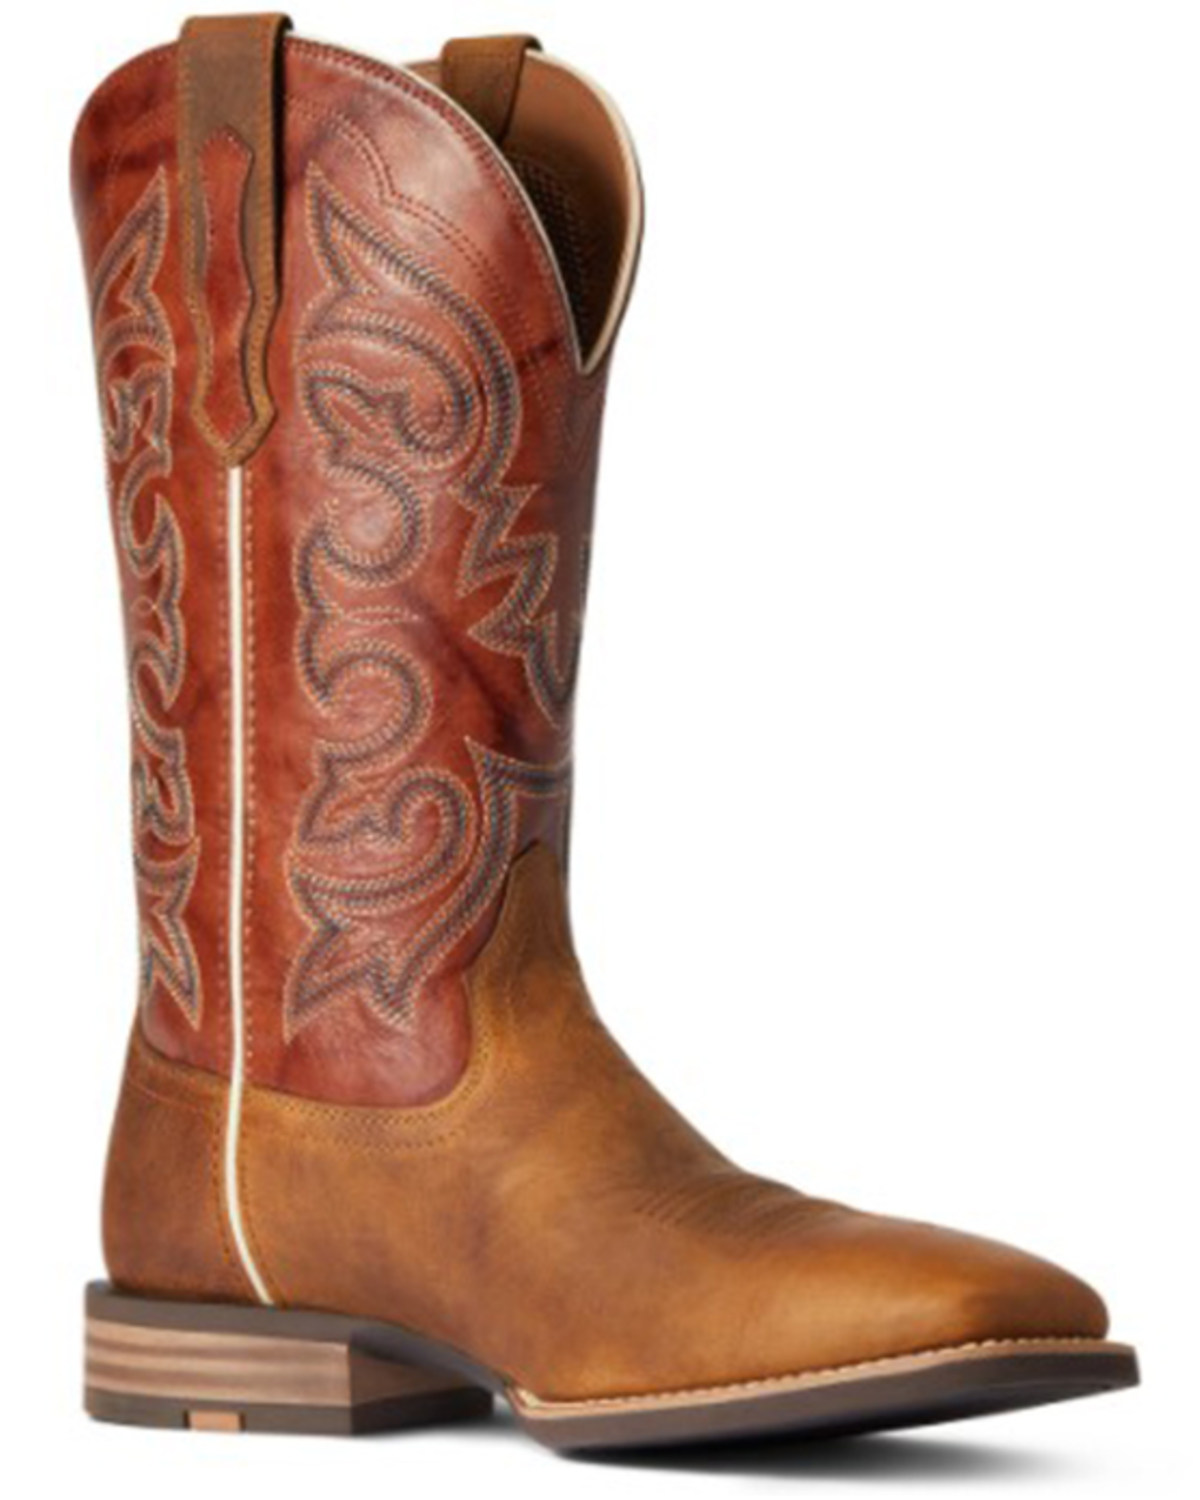 Ariat Men's Everlite Go Getter Western Performance Boots - Broad Square Toe